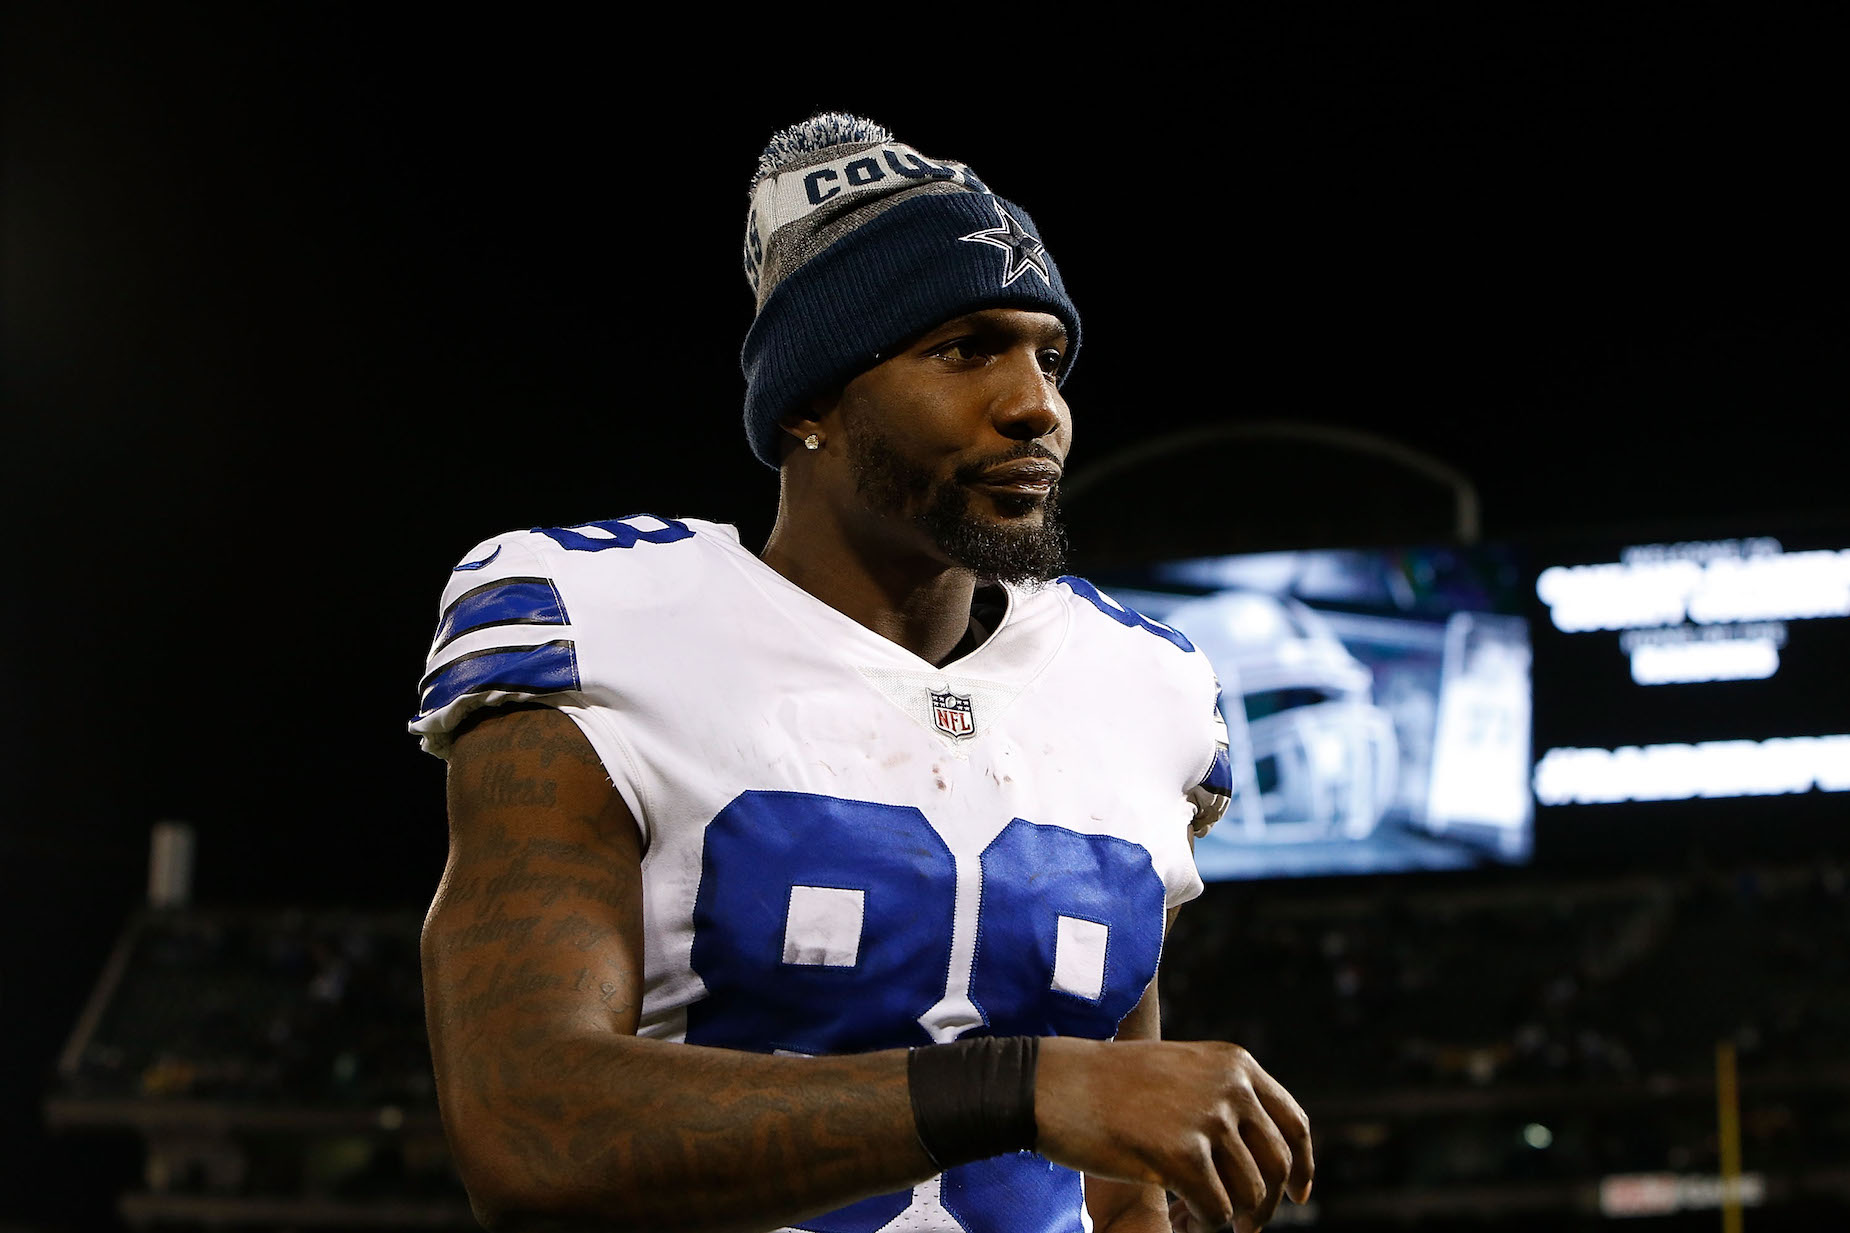 Dez Bryant's contract with the Baltimore Ravens could save his NFL career, but it won't massively change his bottom line.